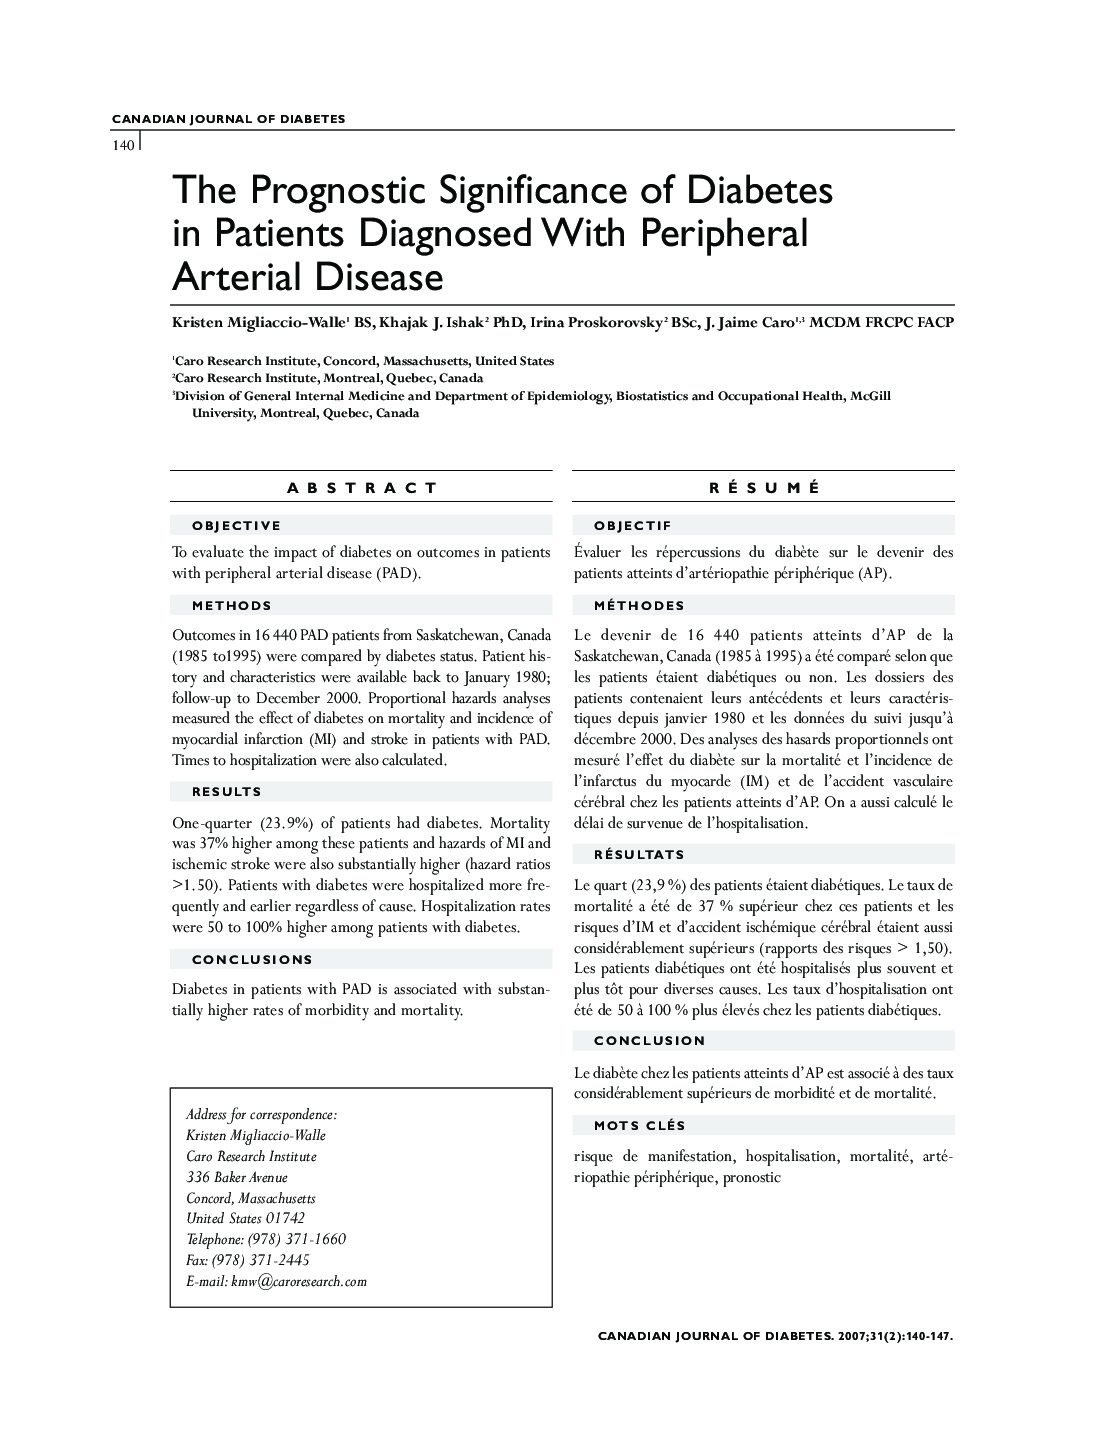 The Prognostic Significance of Diabetes in Patients Diagnosed With Peripheral Arterial Disease